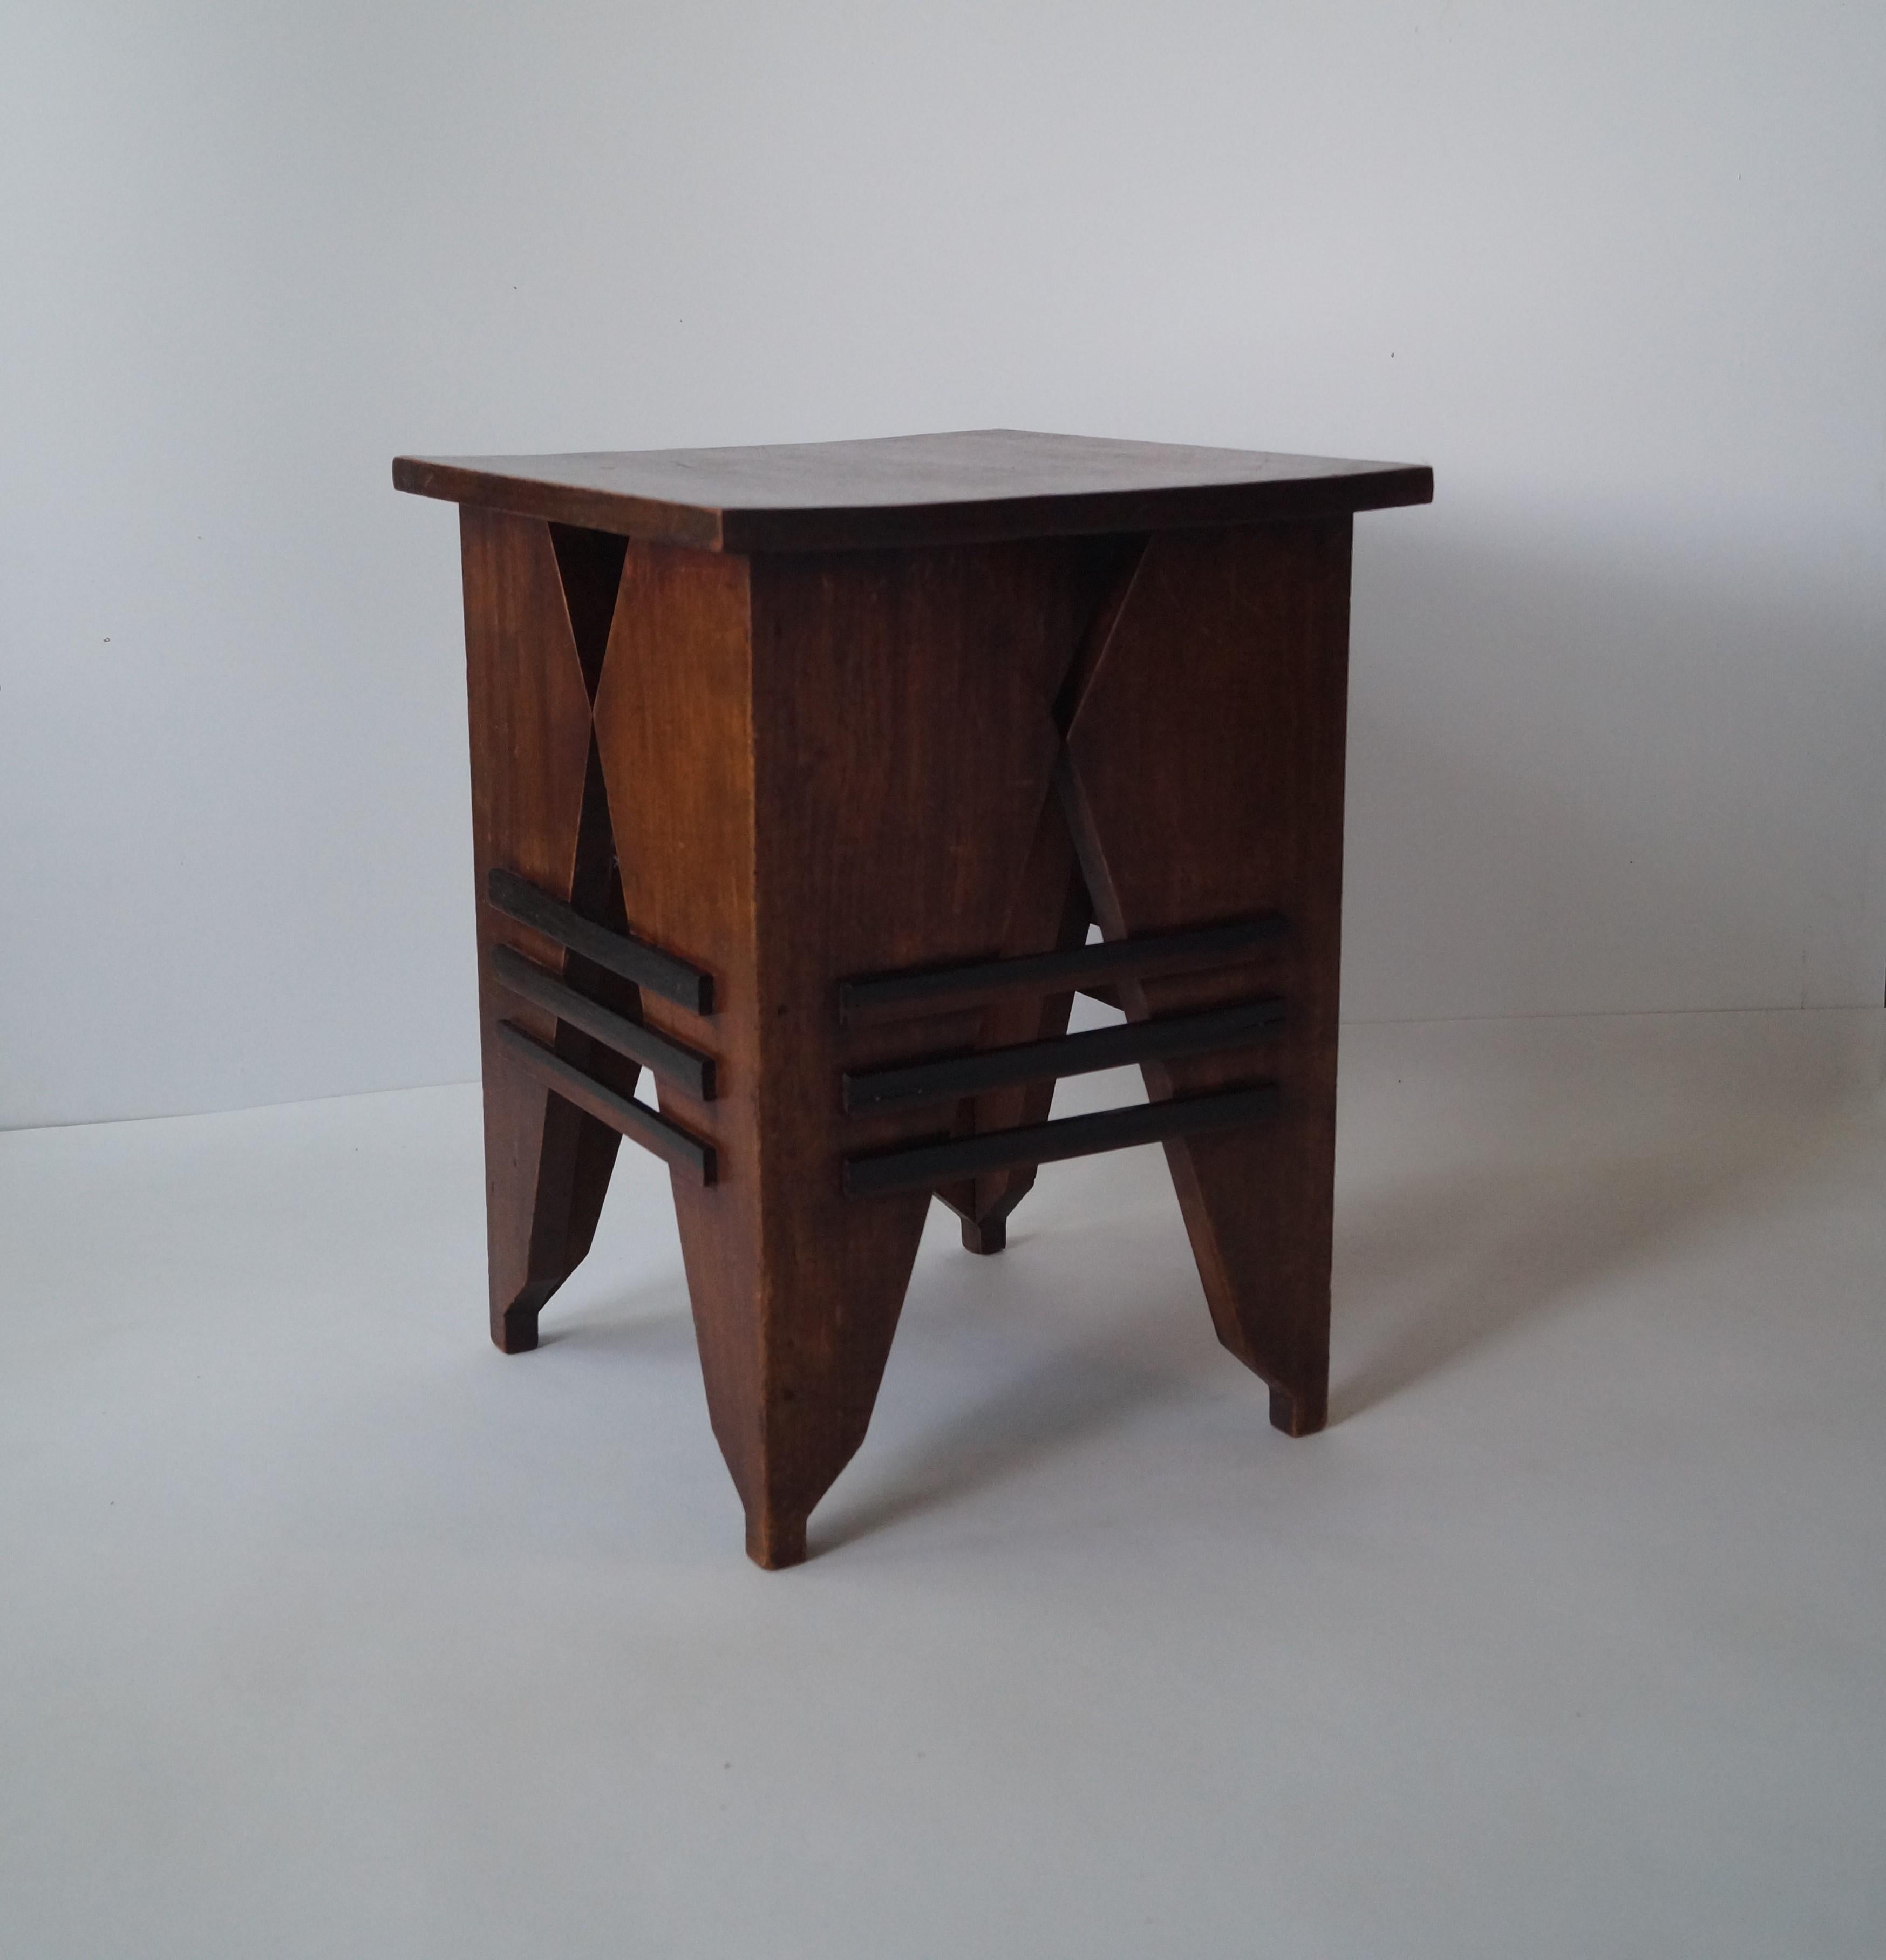 A very decorative occasional table or plant stand from Art Deco era, ca. 1920. Most probably designed by P.E.L. Izeren but definitely manufactured by  ''De Genneper Molen'' (model 286 - see last picture from their old catalogue).